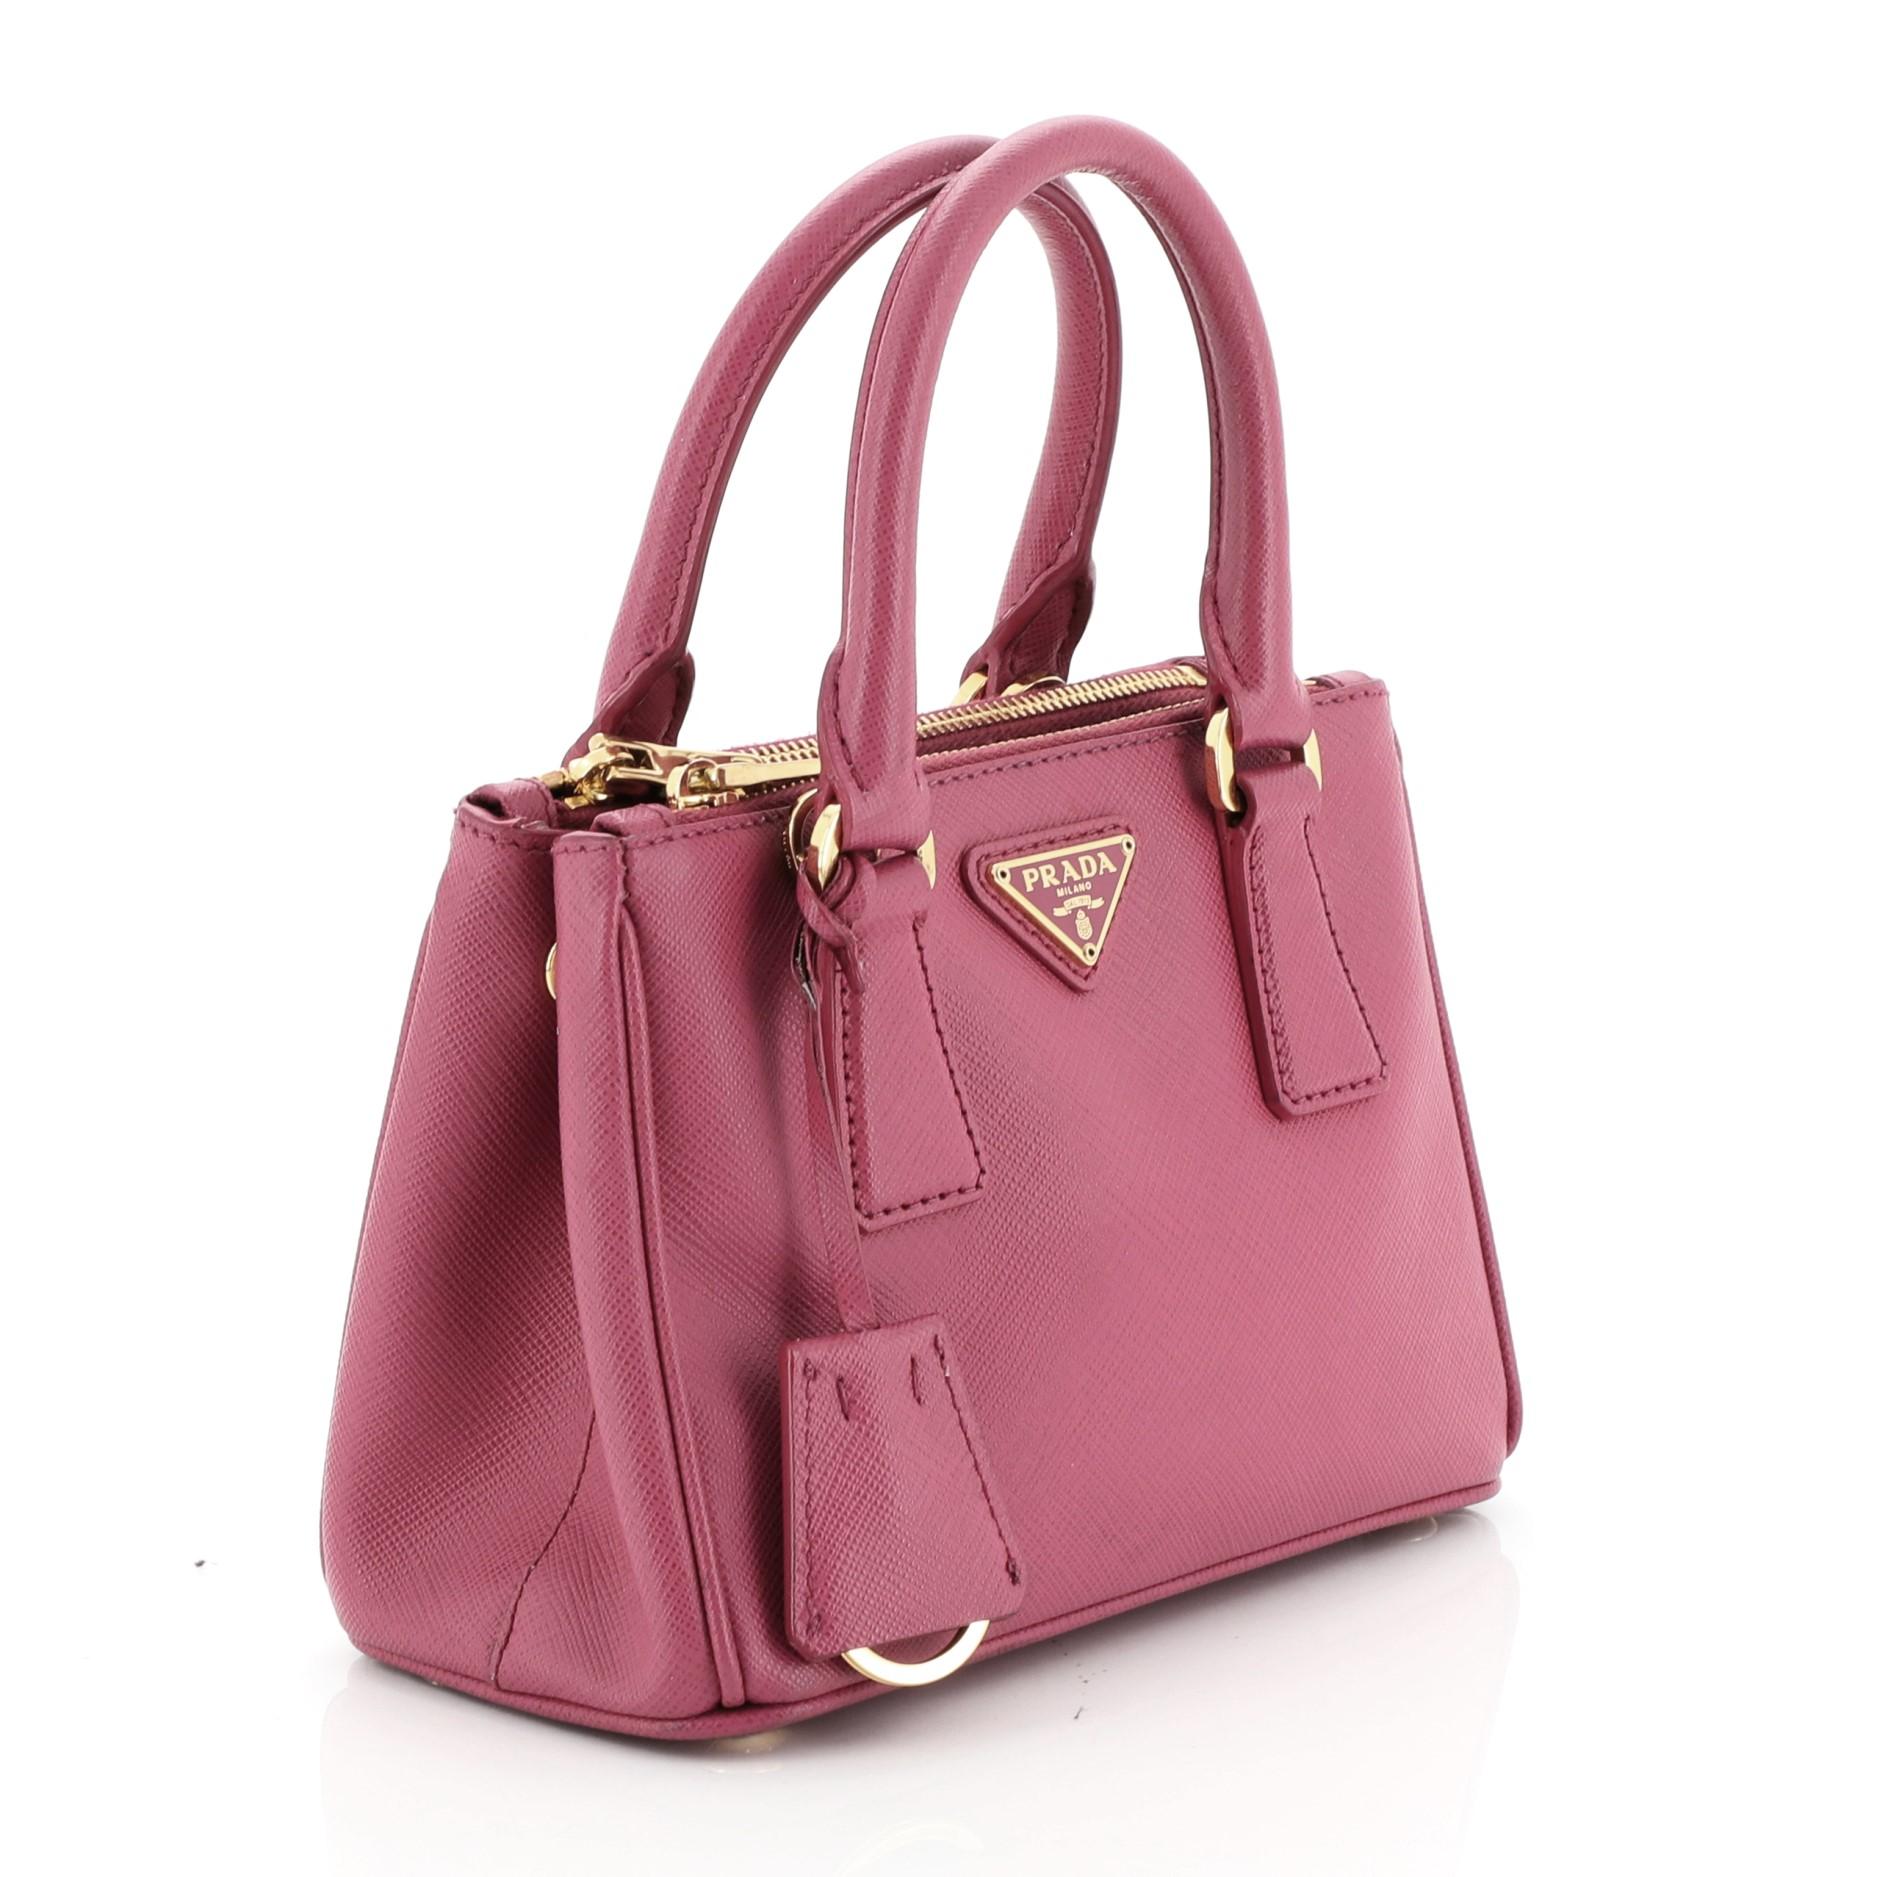 This Prada Galleria Double Zip Tote Saffiano Leather Mini, crafted from pink saffiano leather, features side snap buttons, raised Prada logo plate, dual rolled leather handles, and gold-tone hardware. It opens to a pink fabric interior with two zip